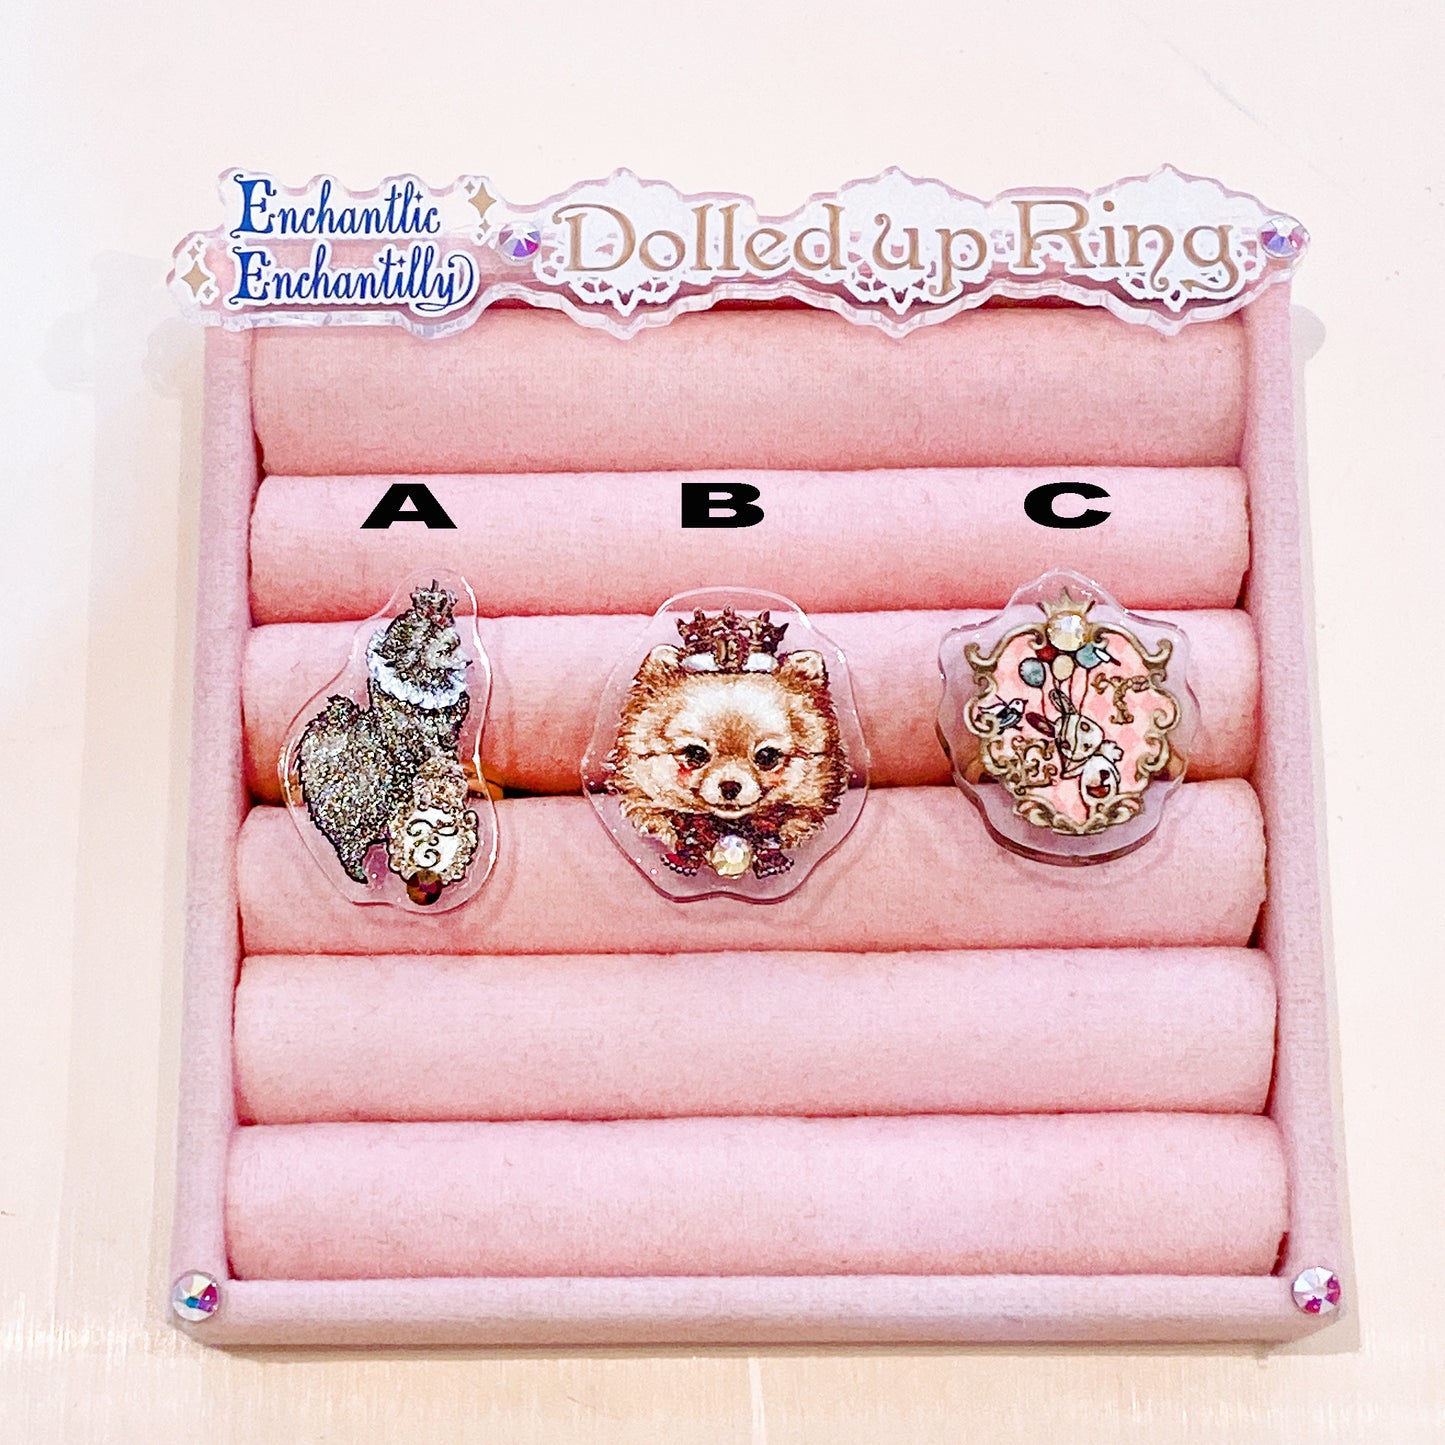 Dolled Up Ring:Fantasy Friends 2